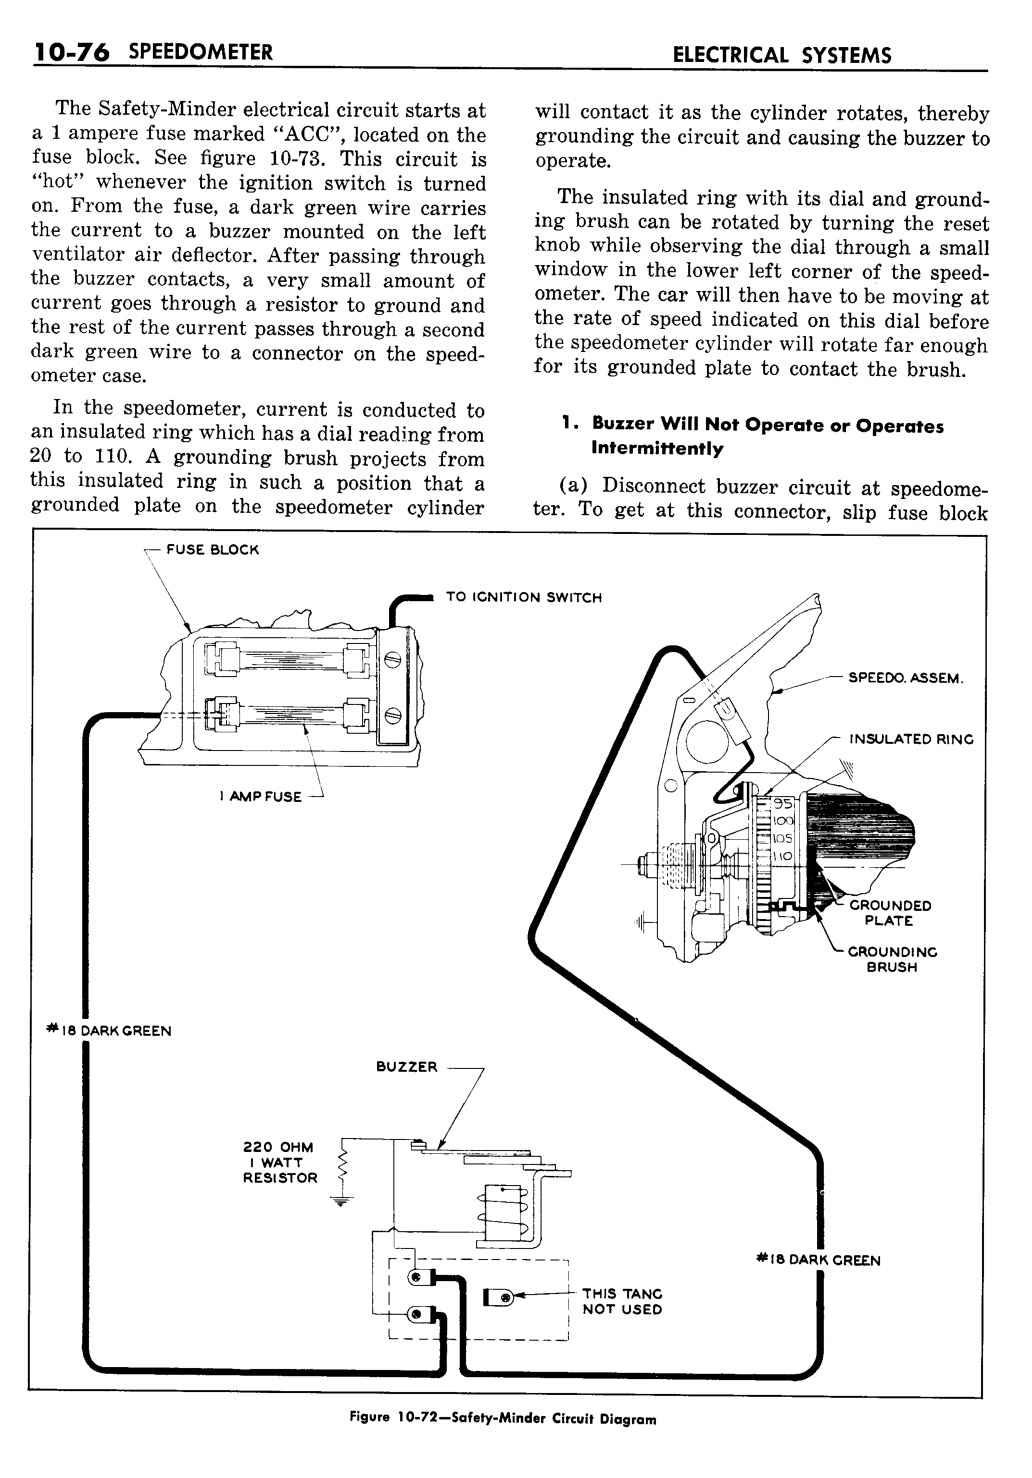 n_11 1957 Buick Shop Manual - Electrical Systems-076-076.jpg